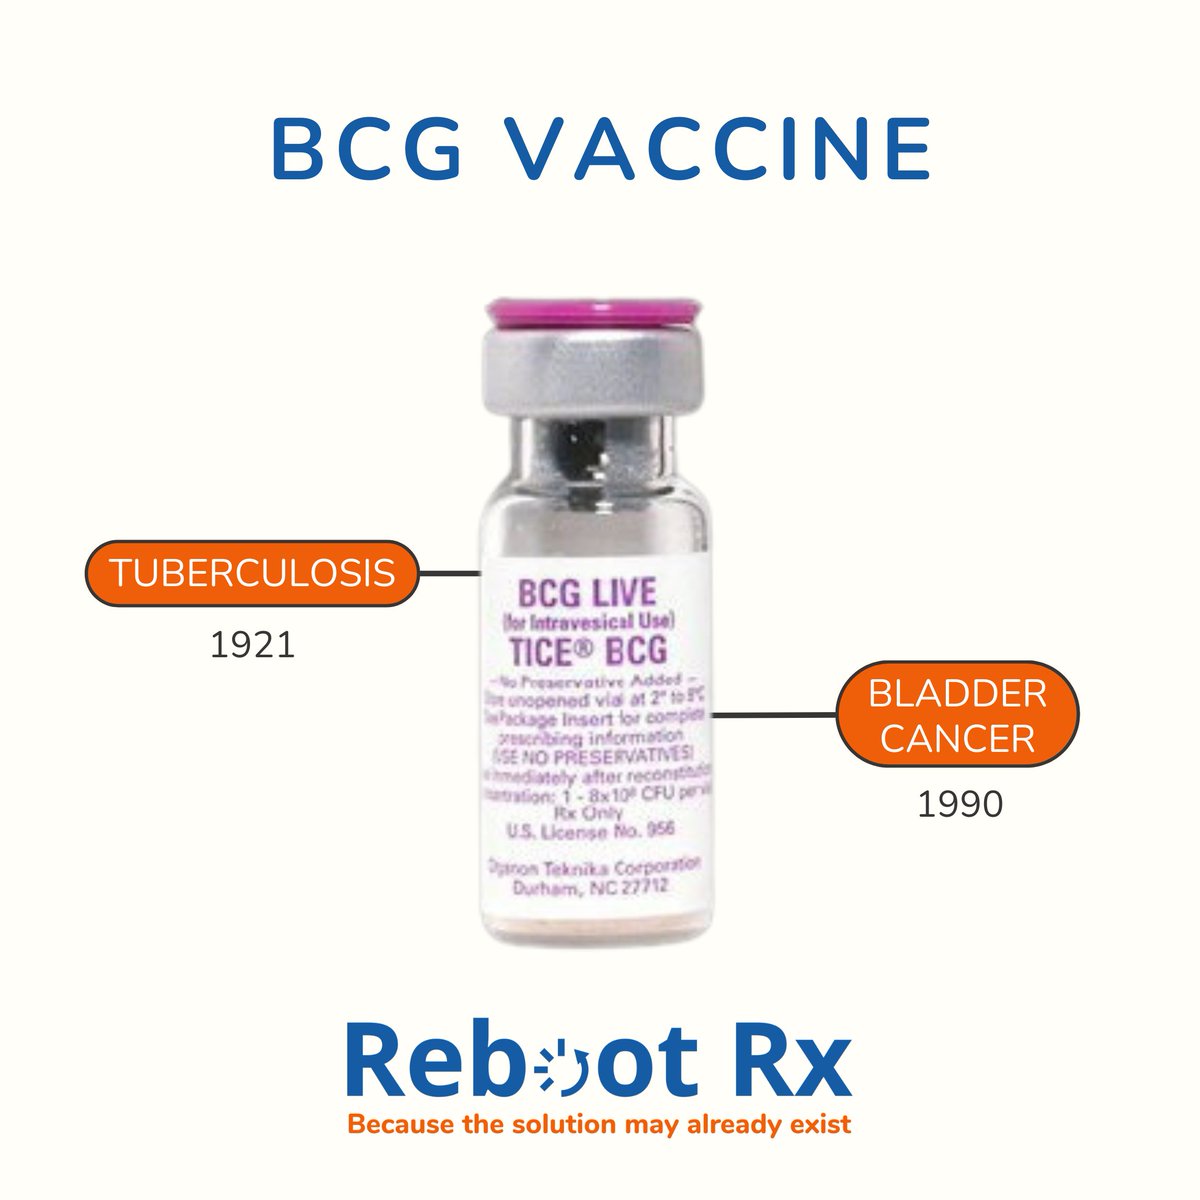 The BCG vaccine for tuberculosis was repurposed for #bladdercancer following a serendipitous clinical observation. BCG reduces the risk of recurrence and progression in high-risk non-muscle invasive bladder cancer and was the first cancer #immunotherapy to be FDA-approved.